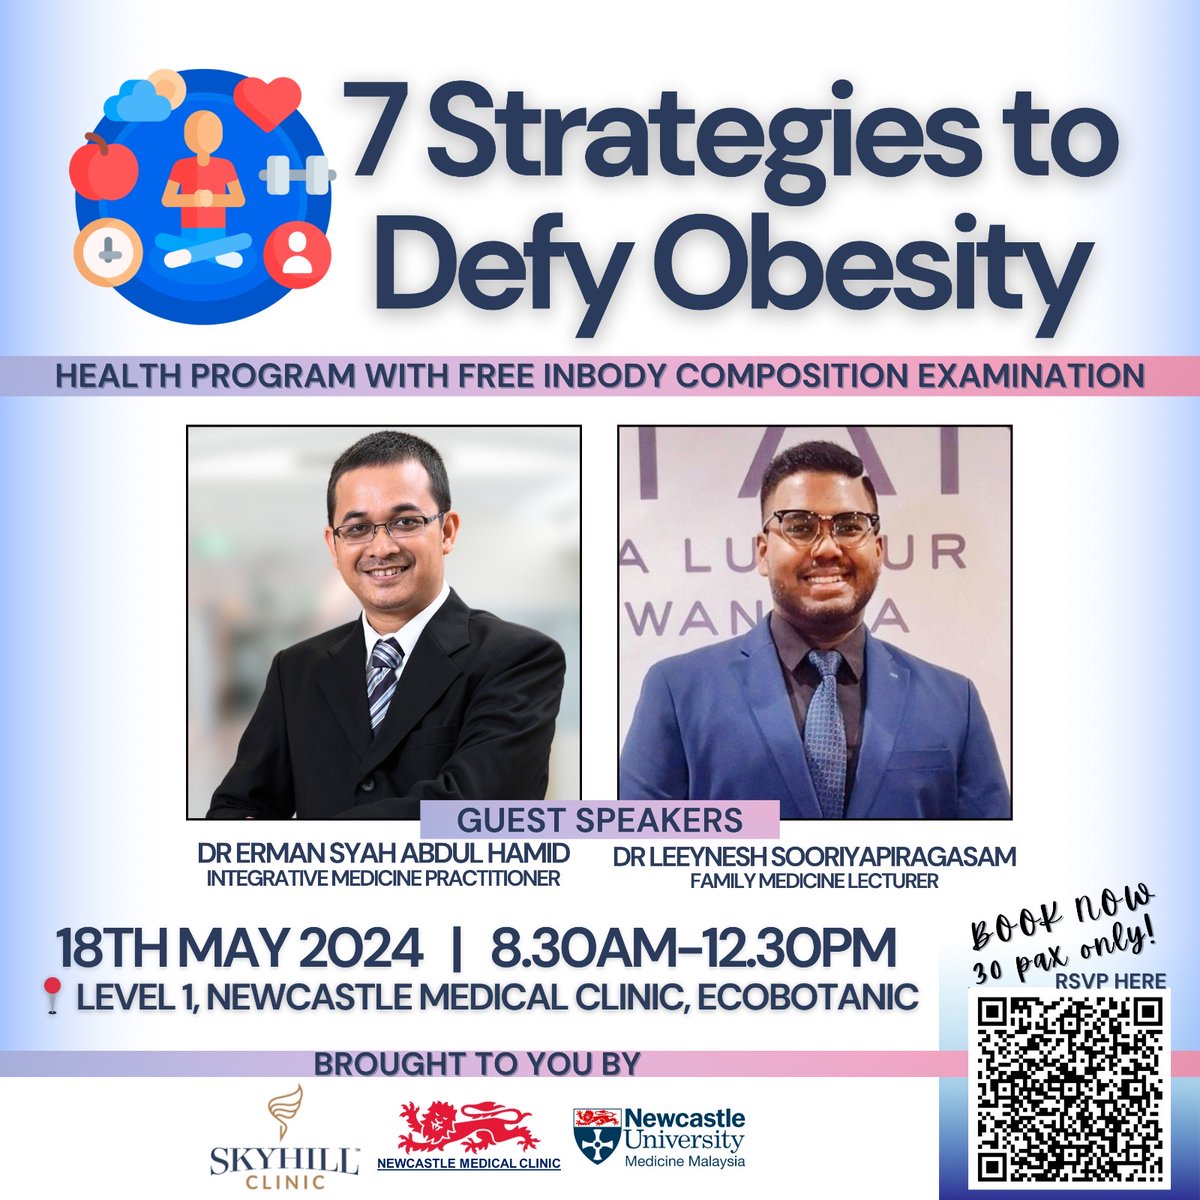 Join us for a special health talk! Newcastle Medical Clinic and Skyhill Clinic are teaming up to bring you '7 Strategies to Defy Obesity,' complete with a free InBody Composition Examination. Register here: forms.office.com/e/FhSfJdCbmr